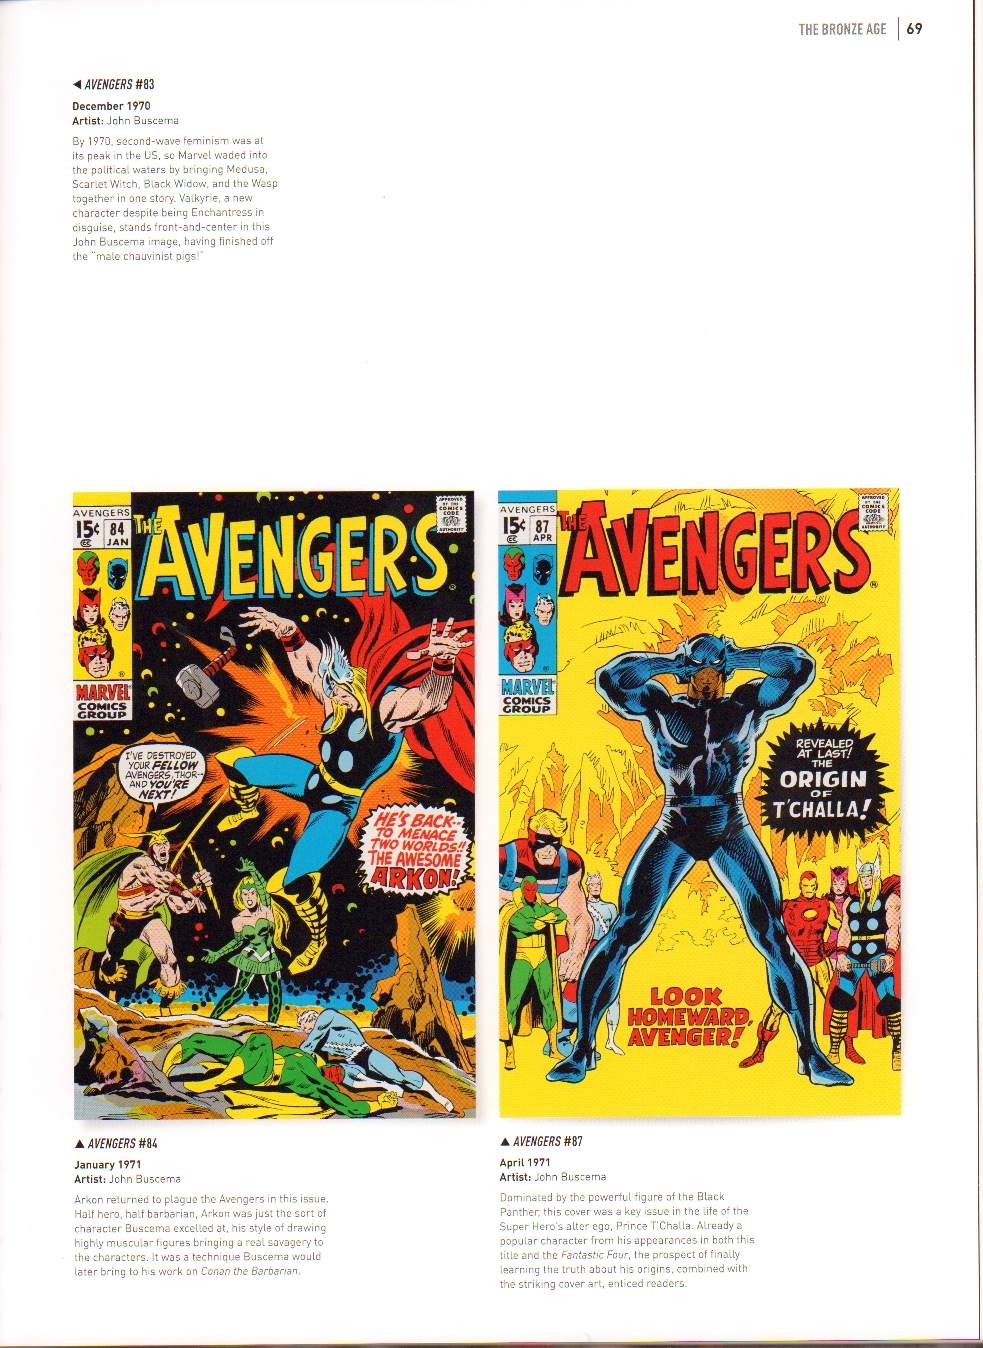 Marvel Comics 75 Years of Cover Art by Various